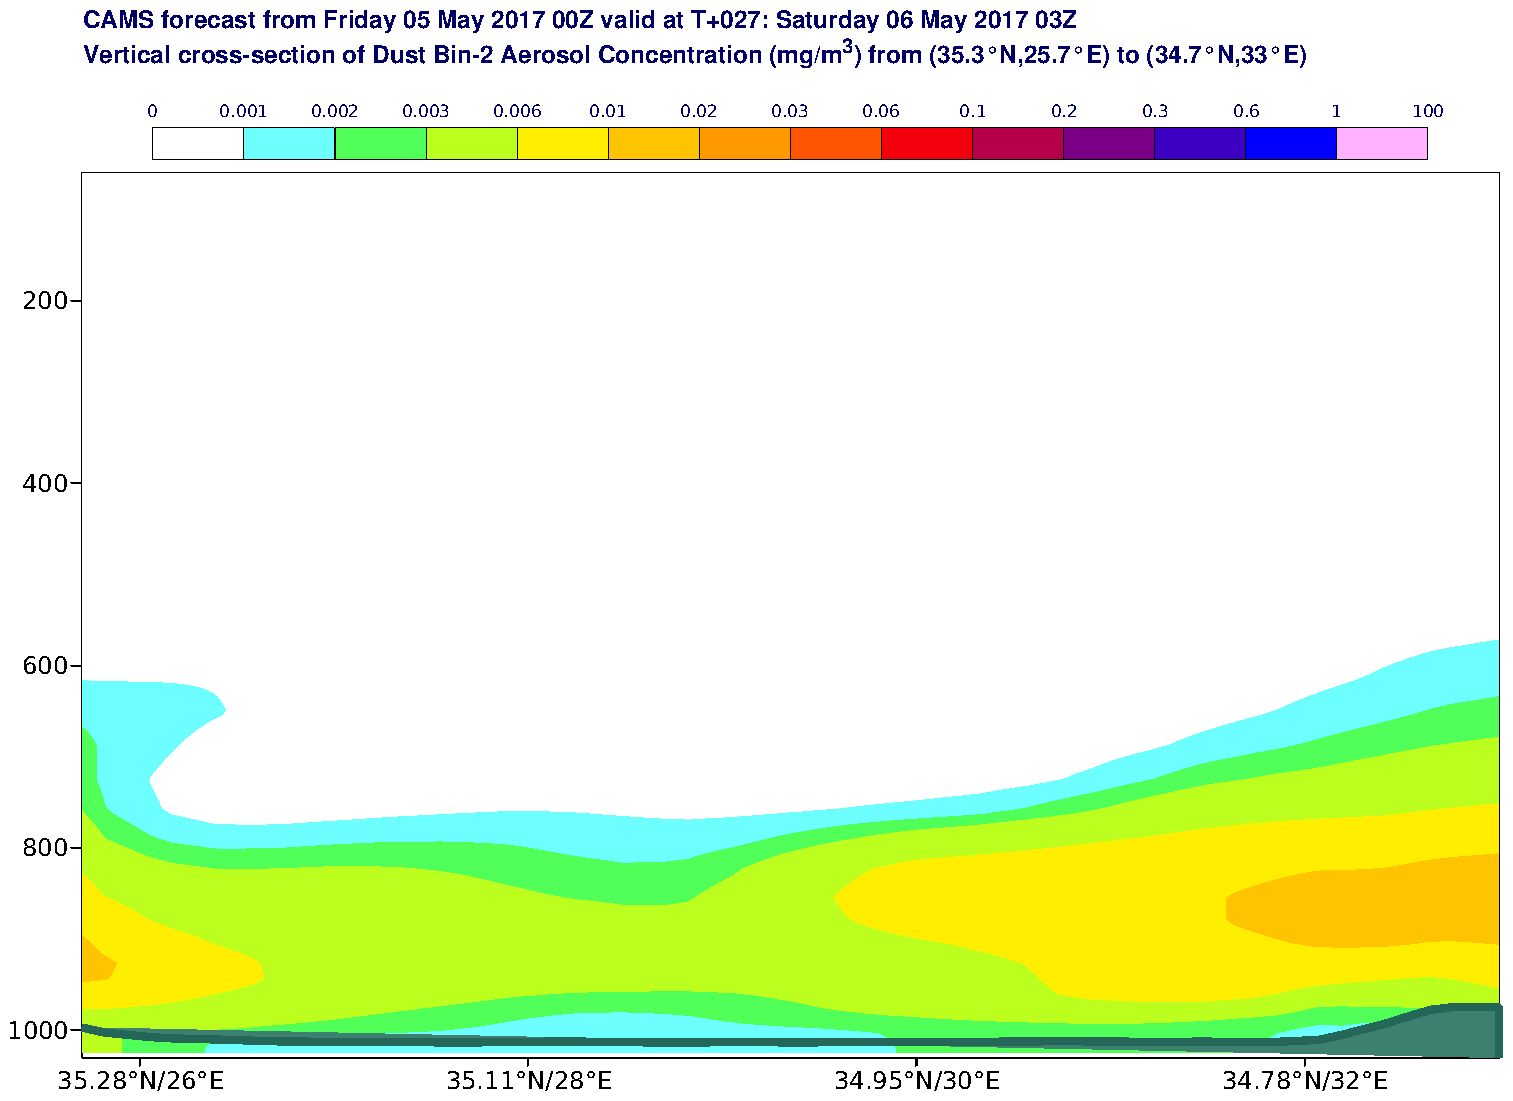 Vertical cross-section of Dust Bin-2 Aerosol Concentration (mg/m3) valid at T27 - 2017-05-06 03:00